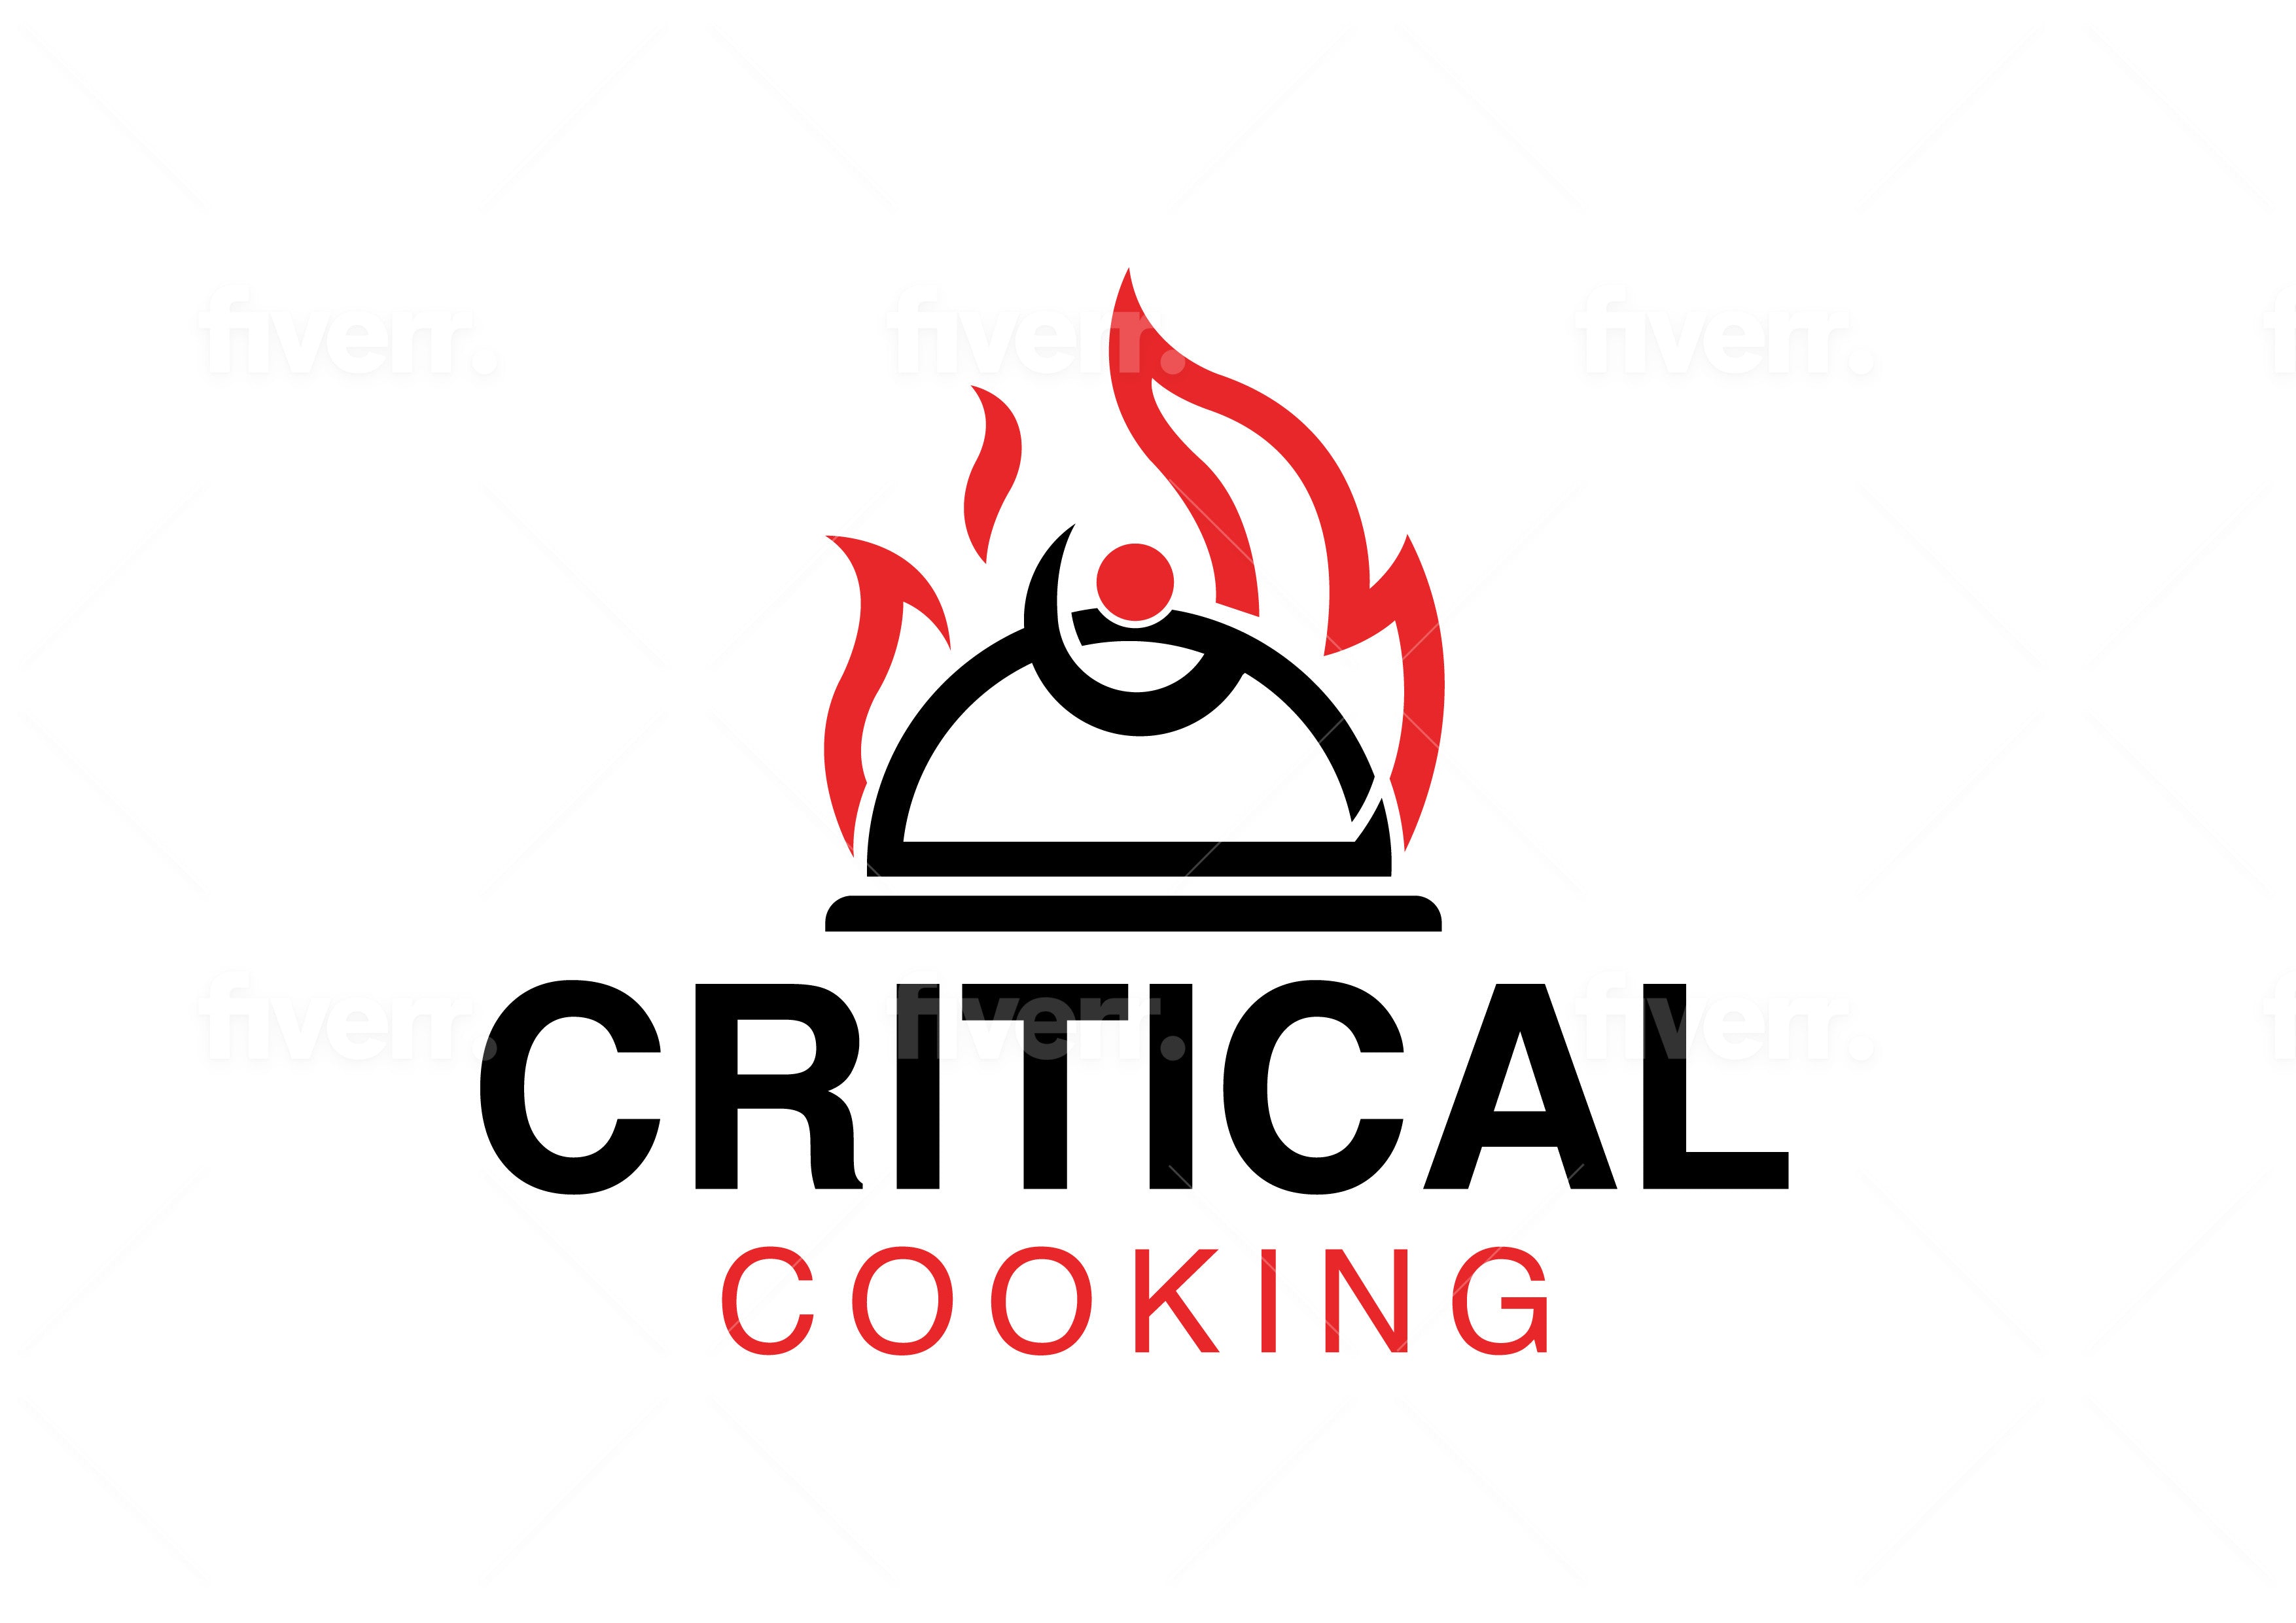 CriticalCooking